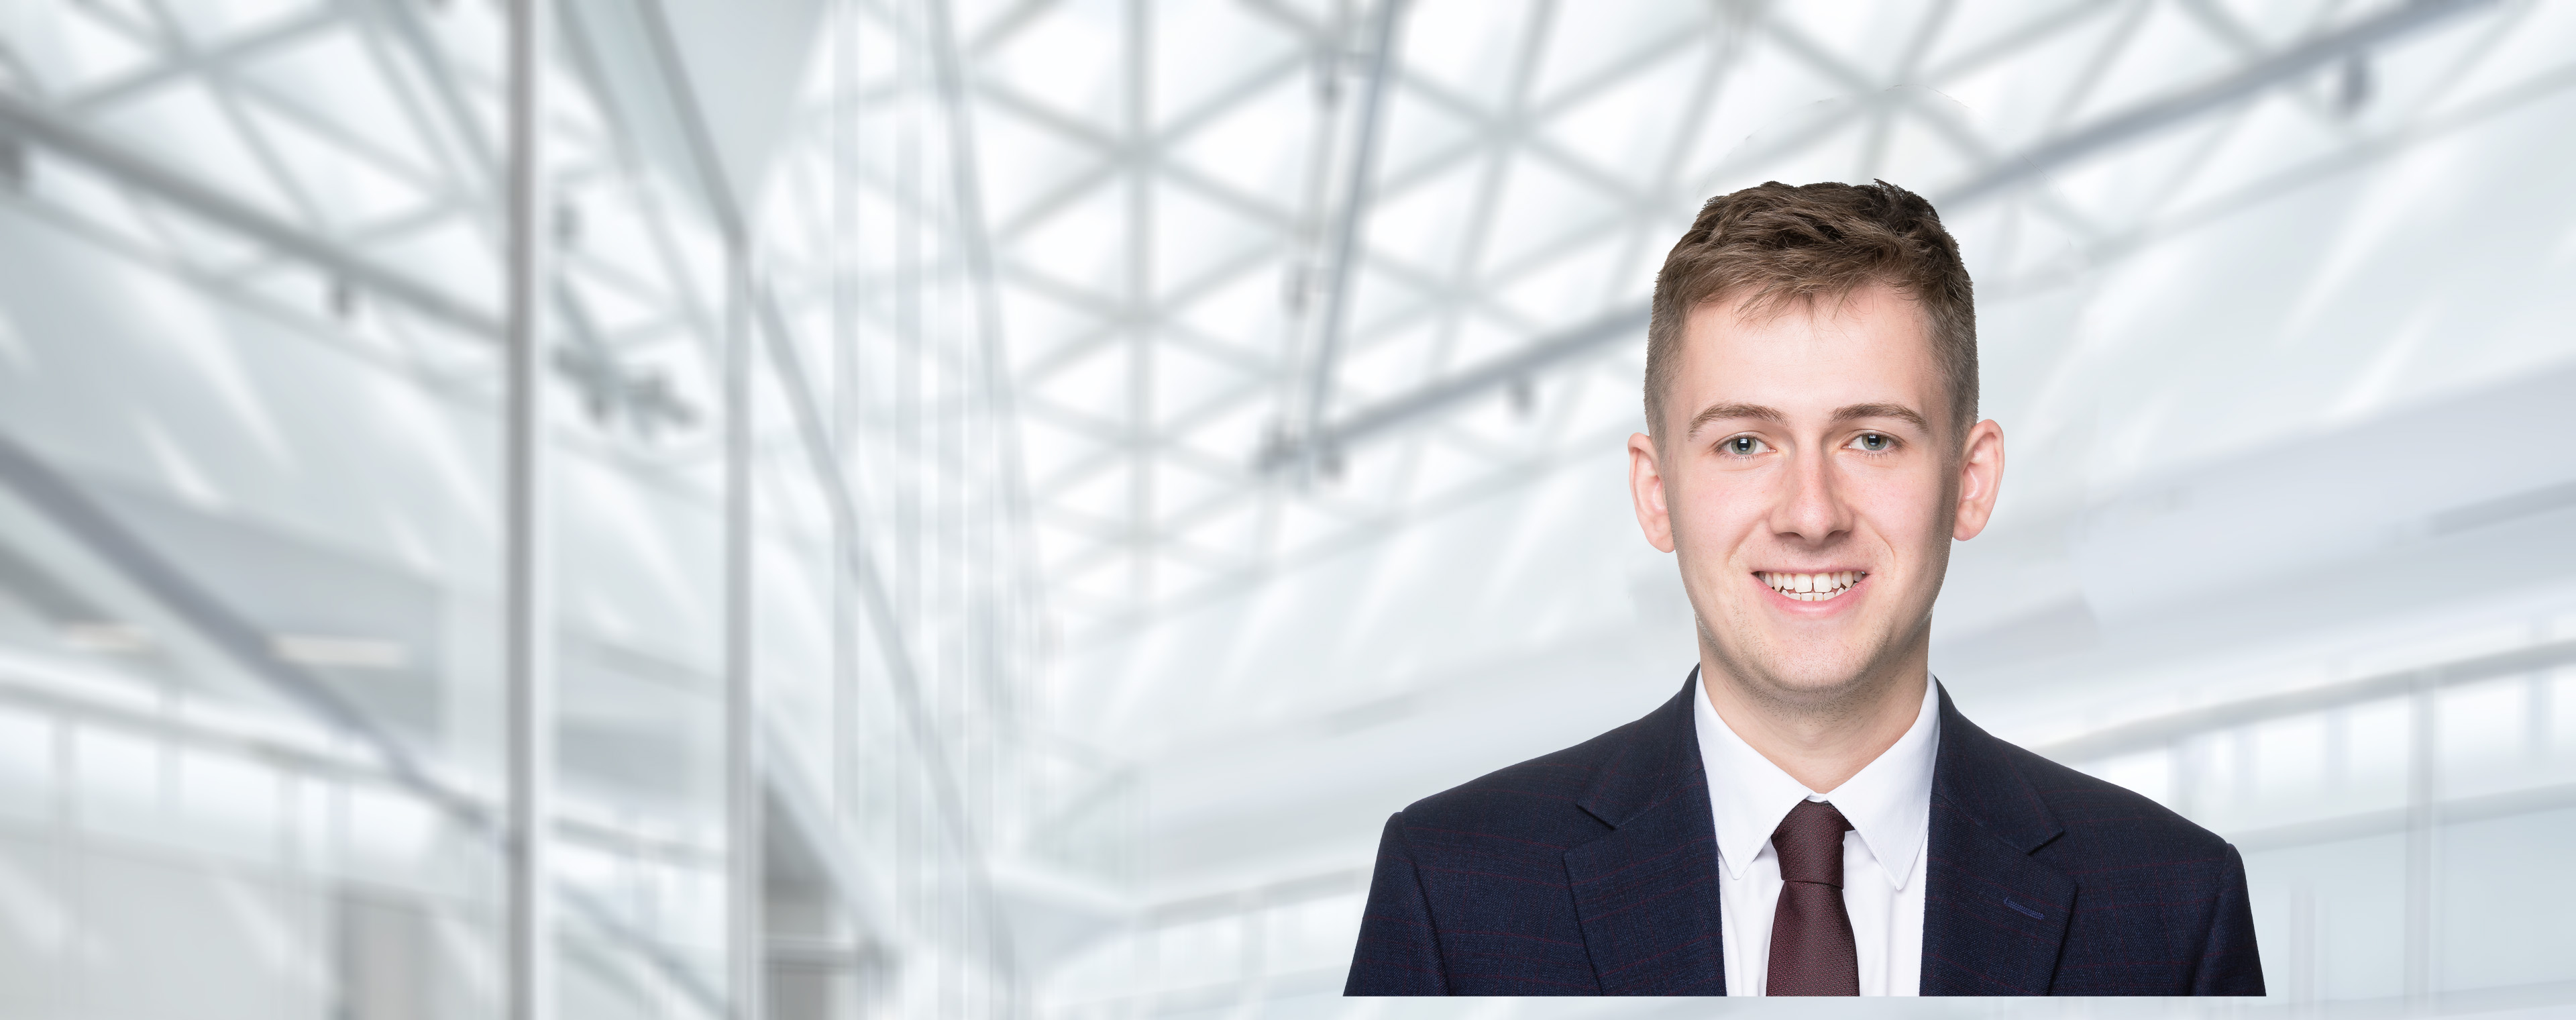 Euan McLaughlan | Trainee Solicitor at Thorntons Solicitors